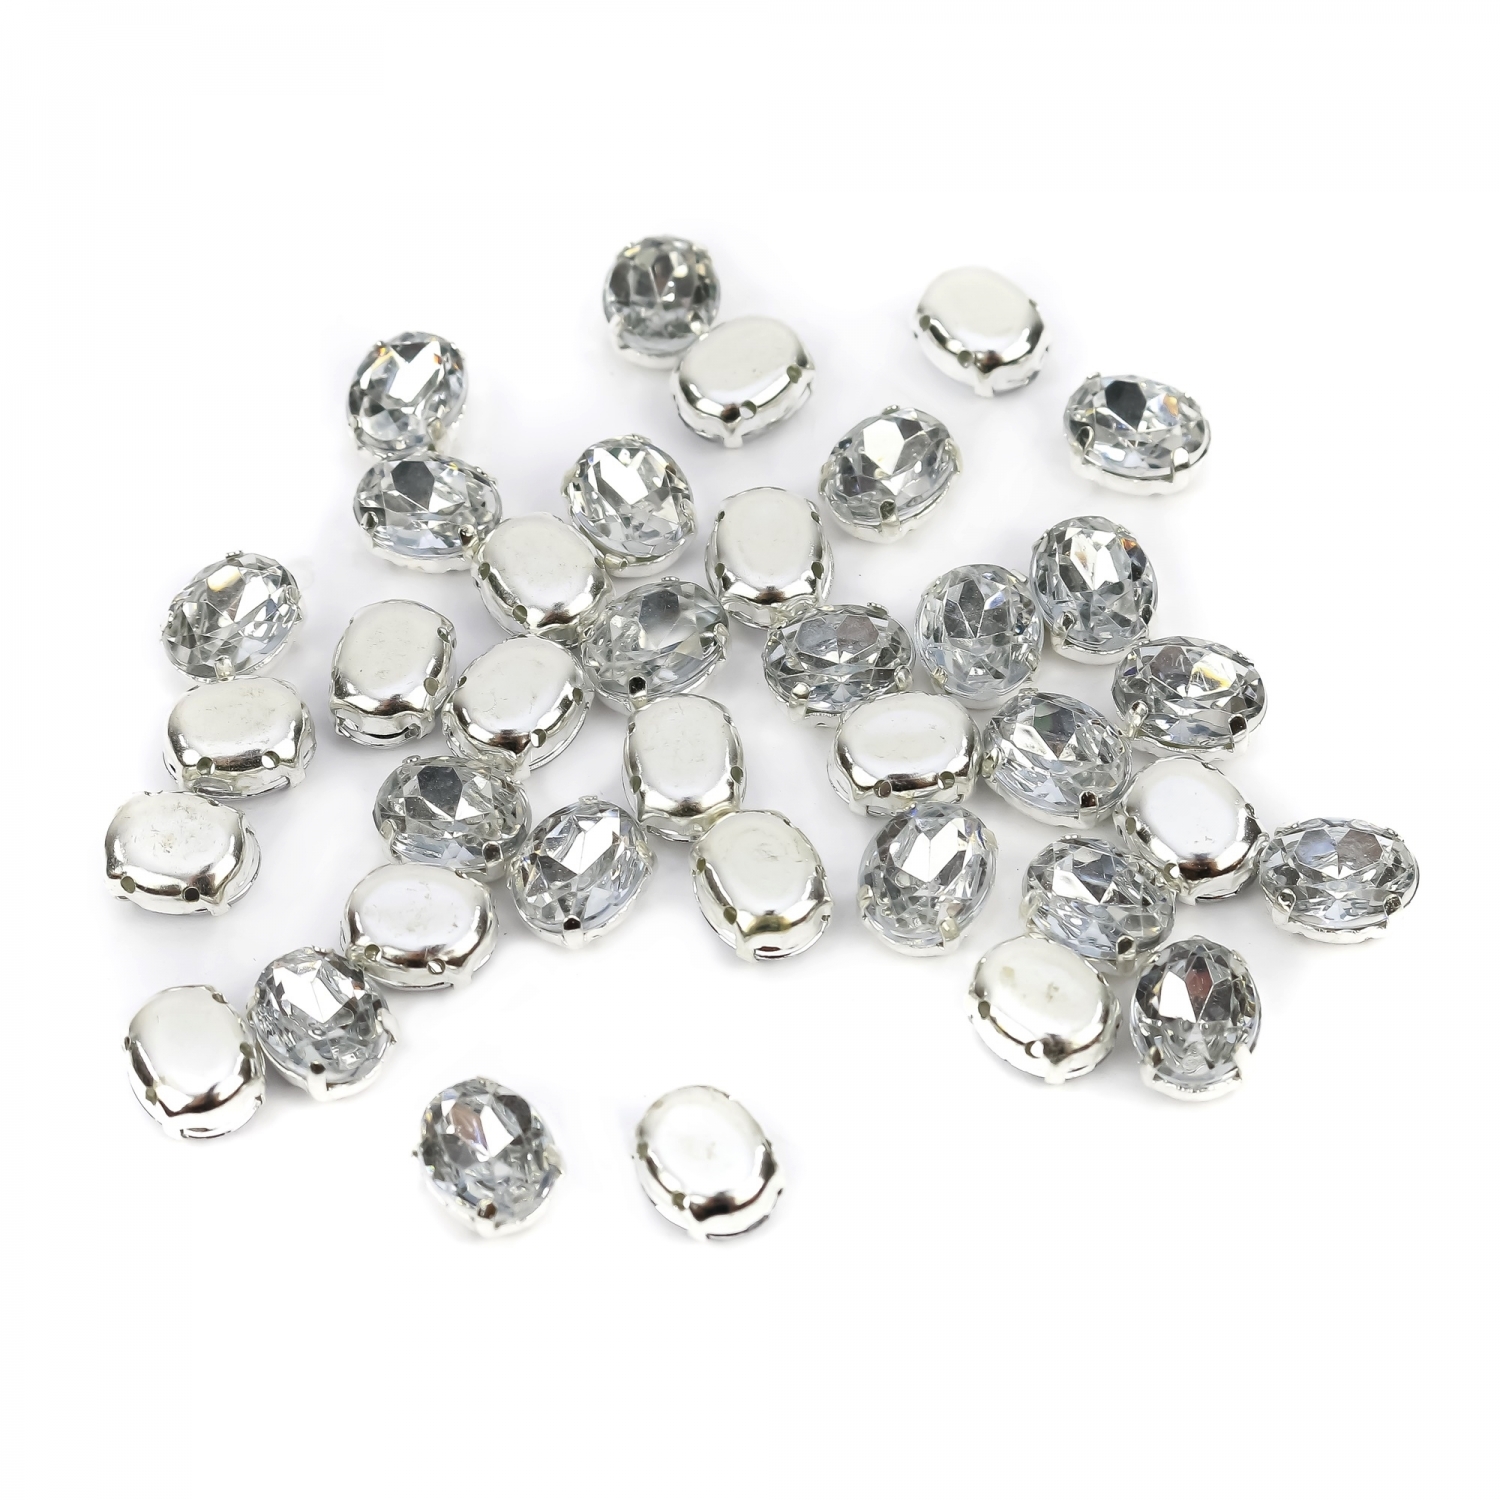 Sew-on Crystals, Size 6x8 mm (100 pcs/pack)Code: R11784